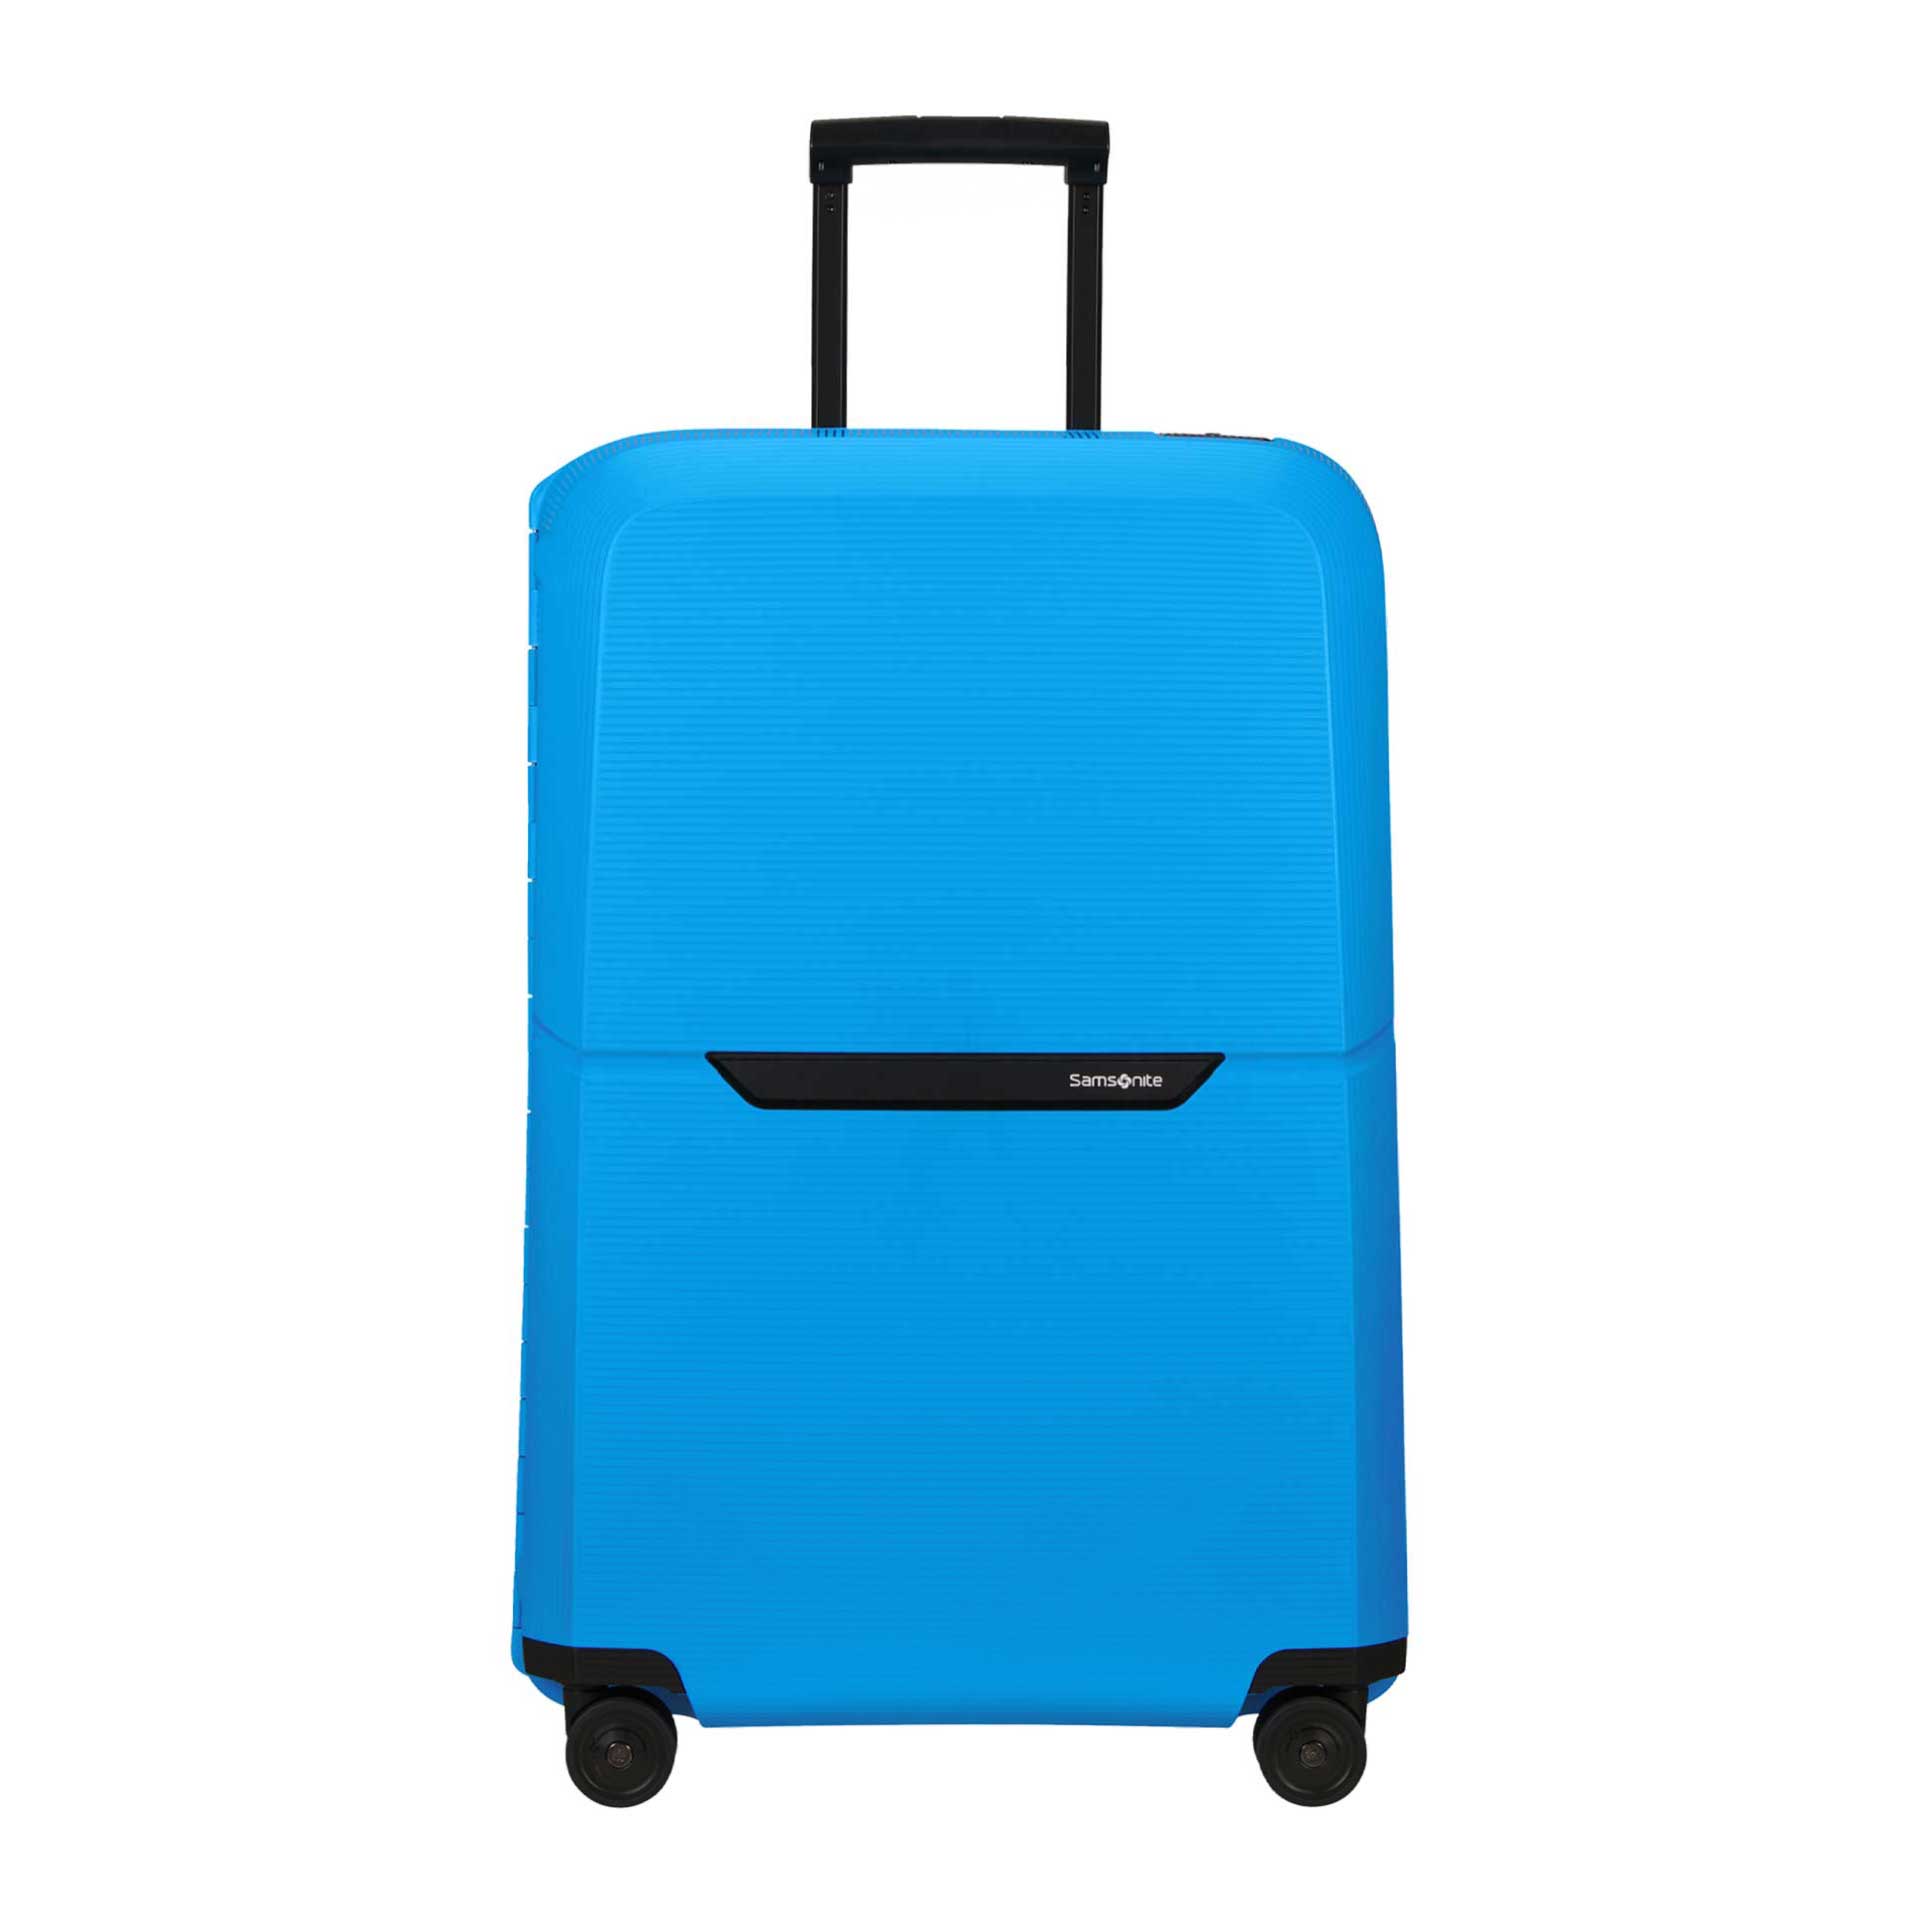 Samsonite Selection Magnum Eco Trolley | | Rollen blue 139847-4497-summerblue 75 cm Material summer Recycling blue aus 4 mit summer